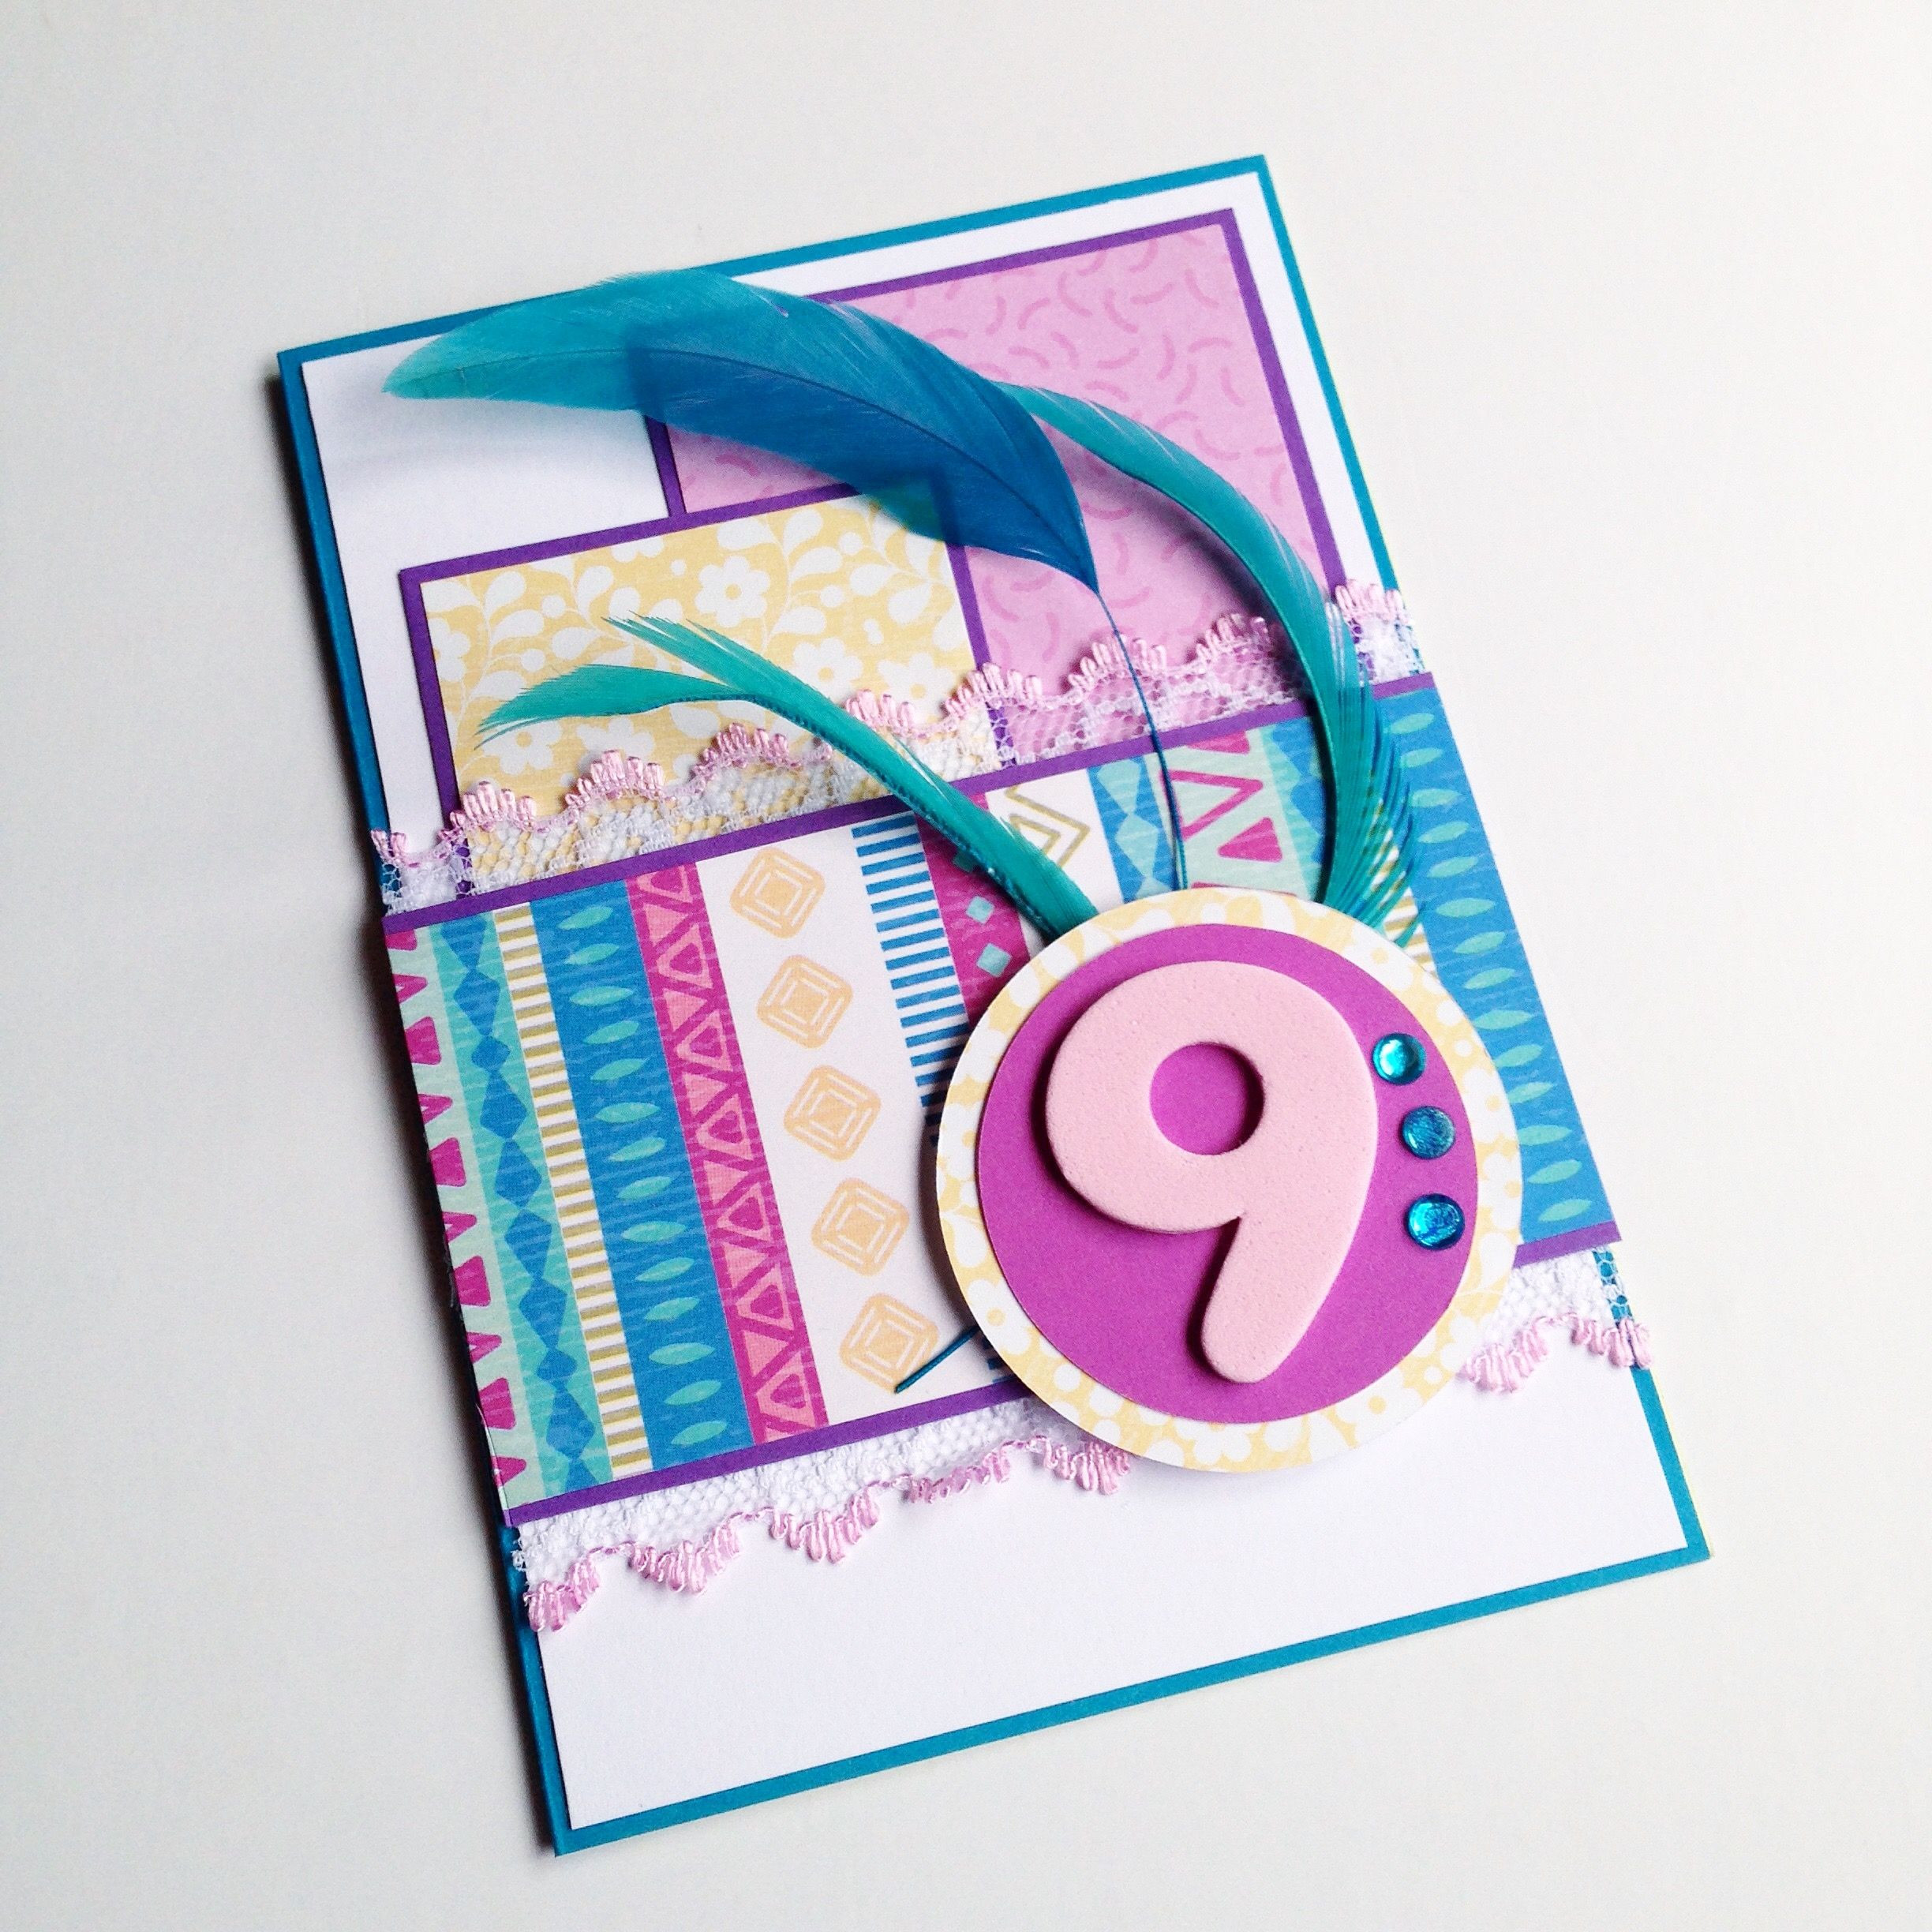 9 Year Old Birthday Gift Ideas
 Feathers and stripes birthday card for a 9 year old girl